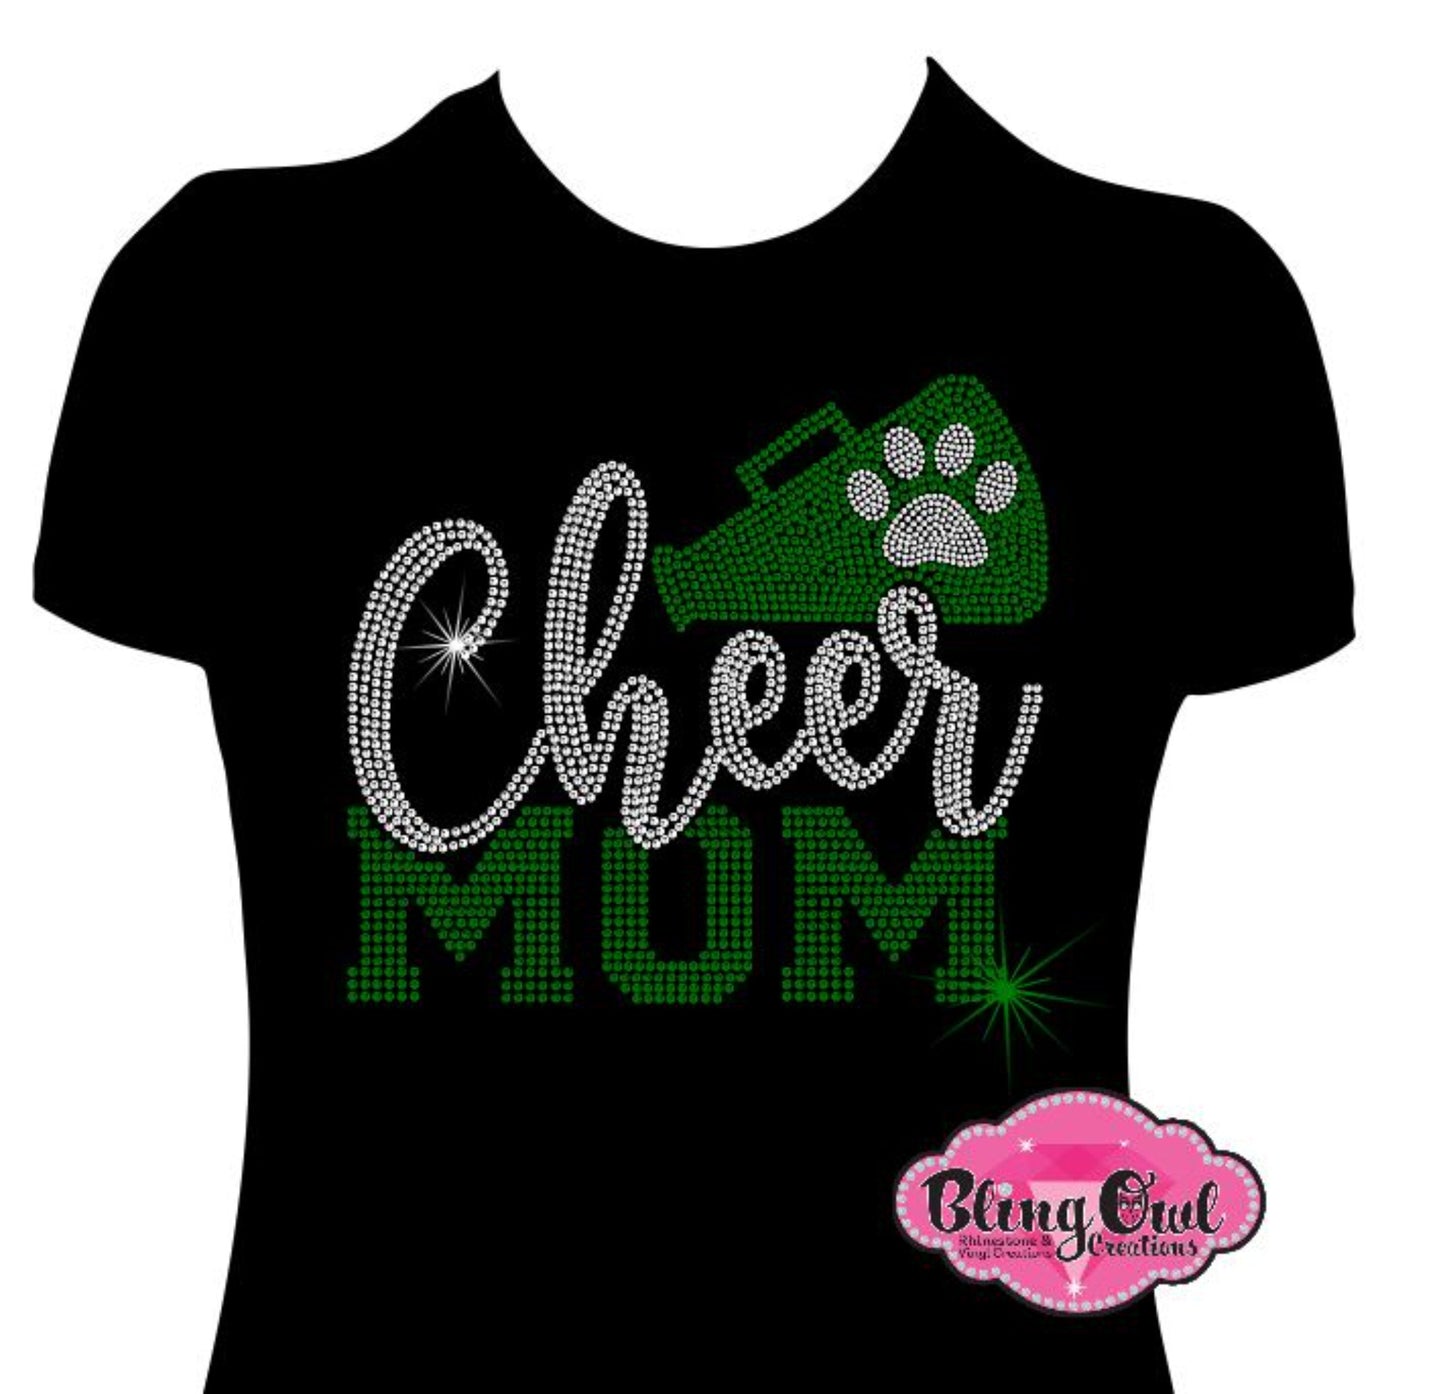 cheer_mom_megaphone design glam_shirt rhinestones sparkle bling _perfect_cute_trendy_cheer_mom_tees gameday_outfit school_spirit_wear for moms